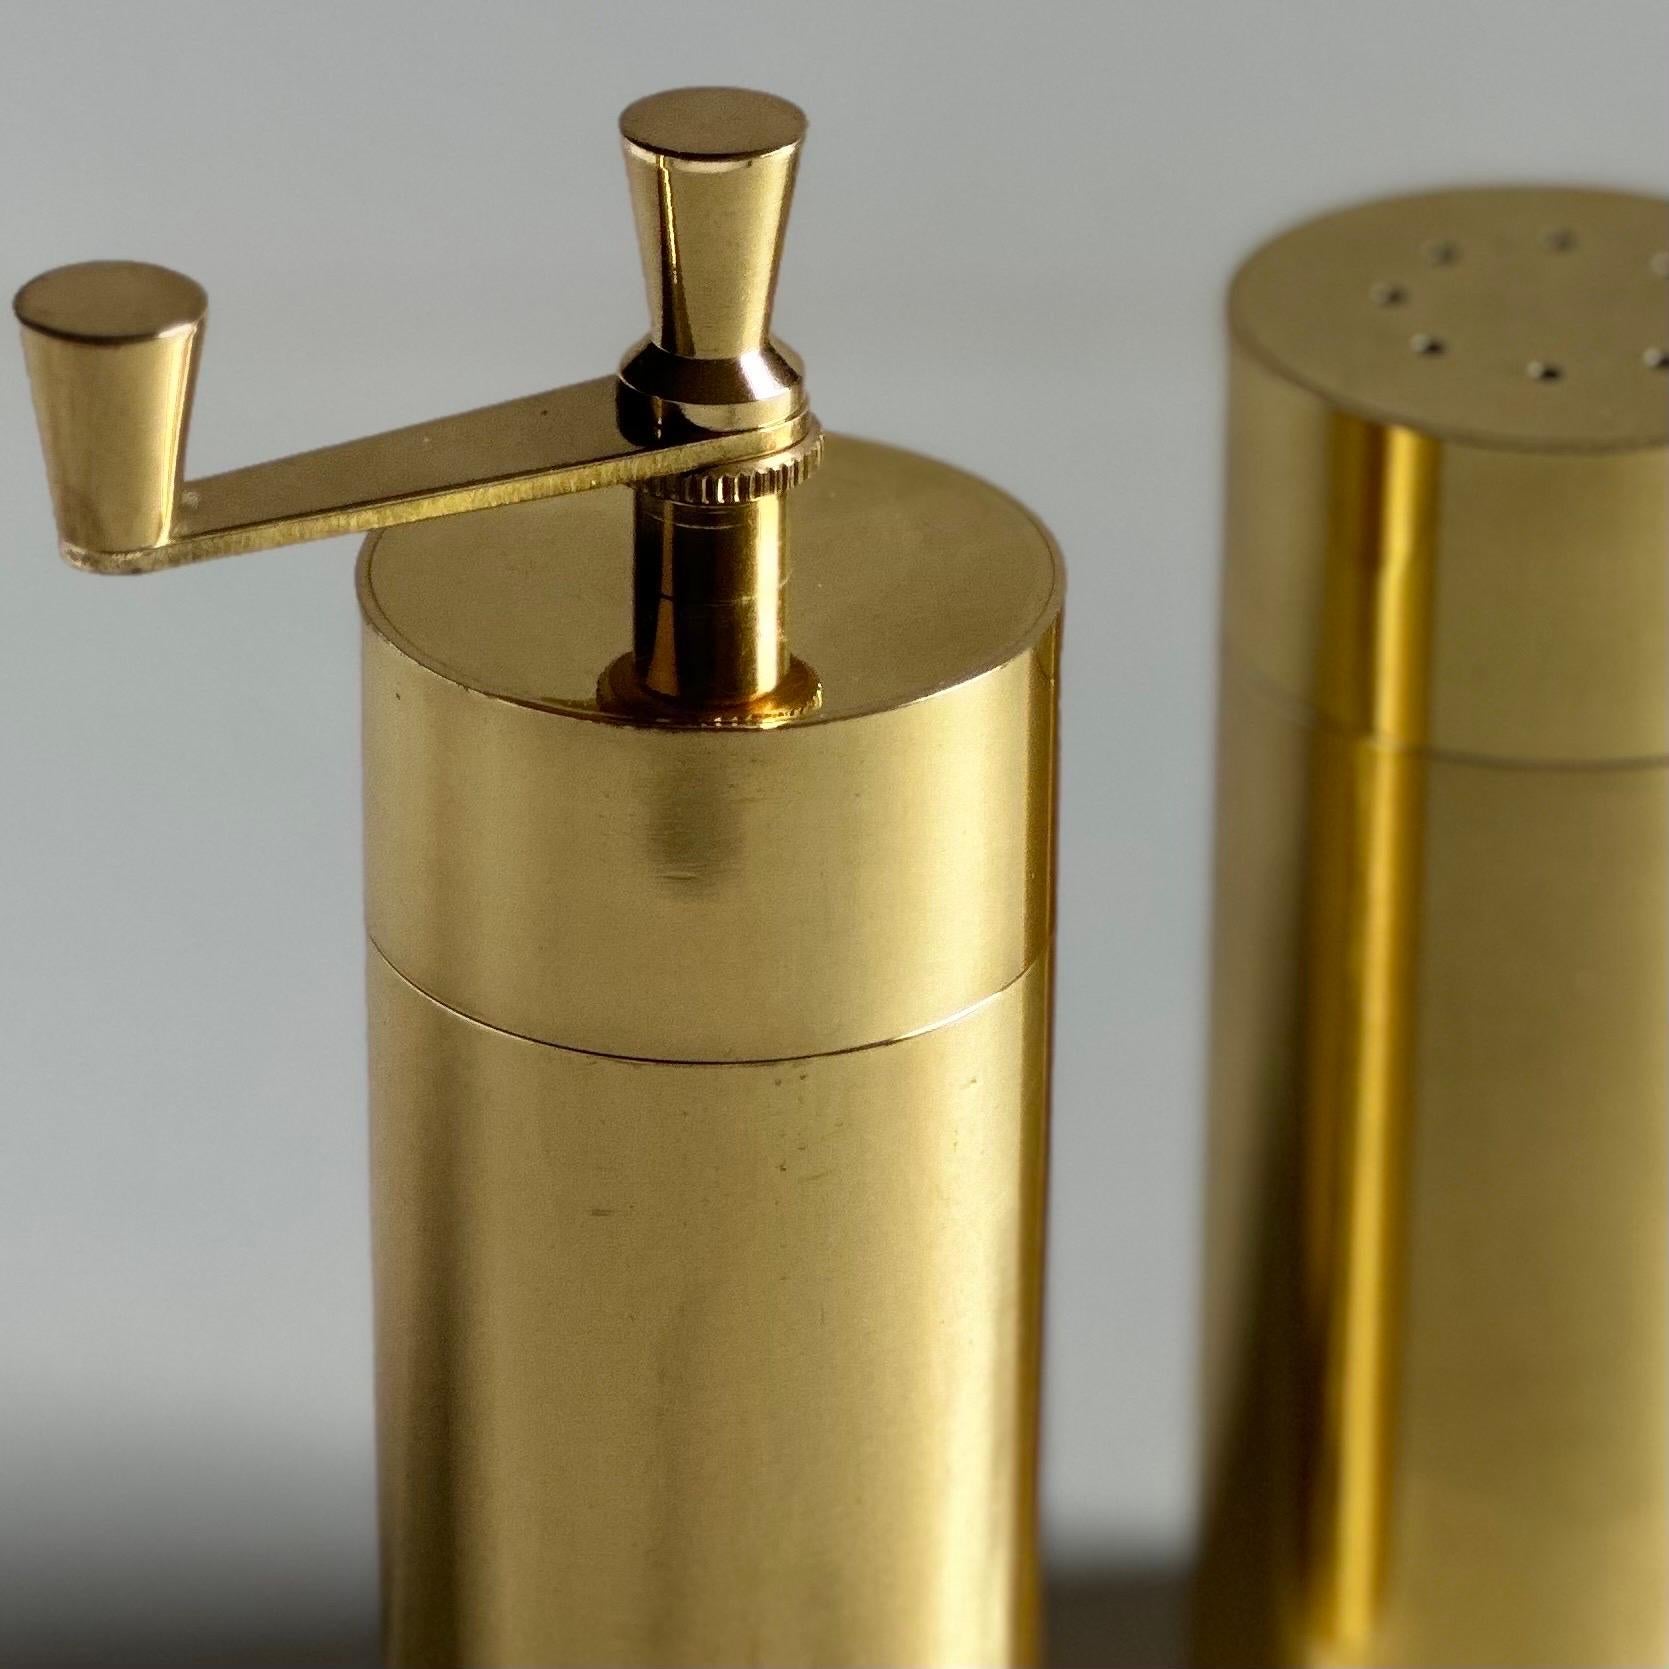 Modernist Lacquered Brass Pepper Mill and Salt Shaker, Italy, Original Box, 1960 For Sale 1